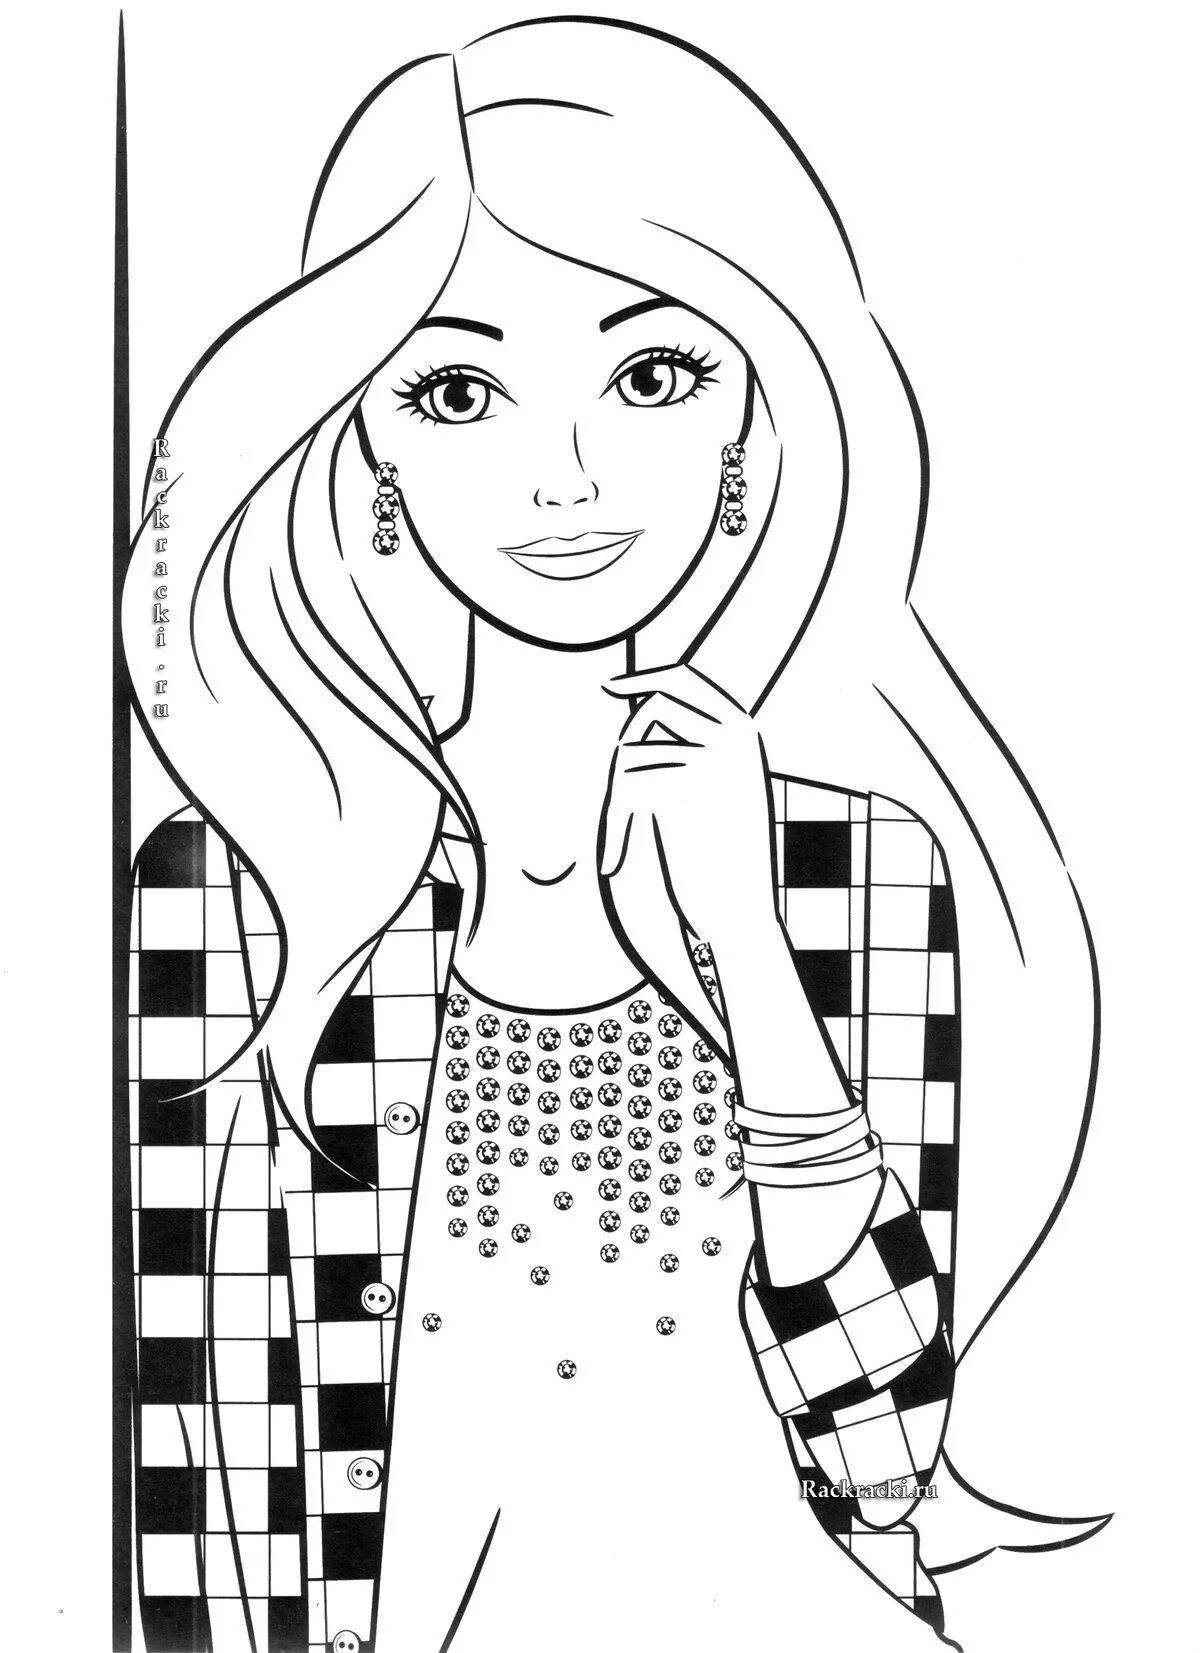 Coloring book for girls 9-10 years old